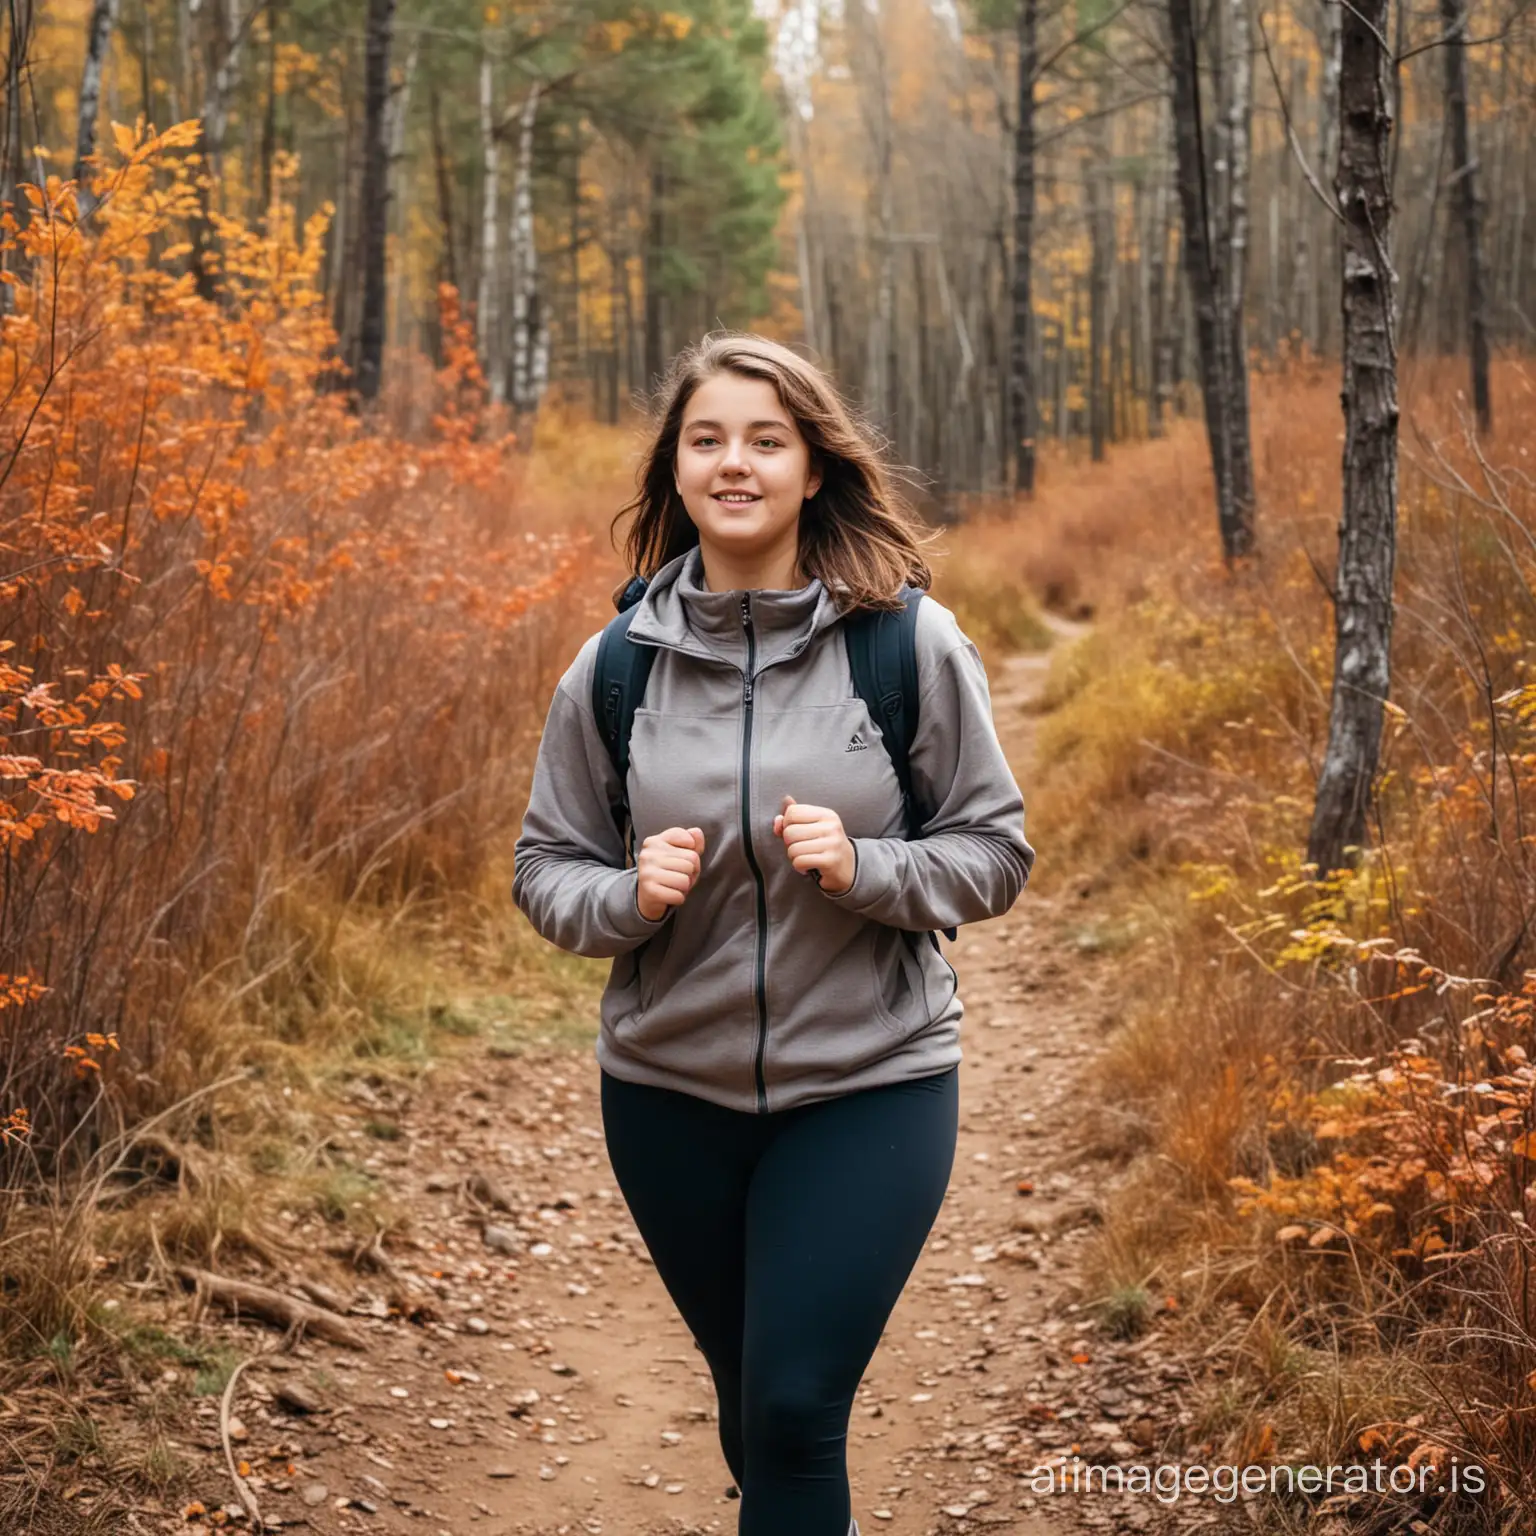 Teenage-Girl-Hiking-in-Autumn-Forest-Mountain